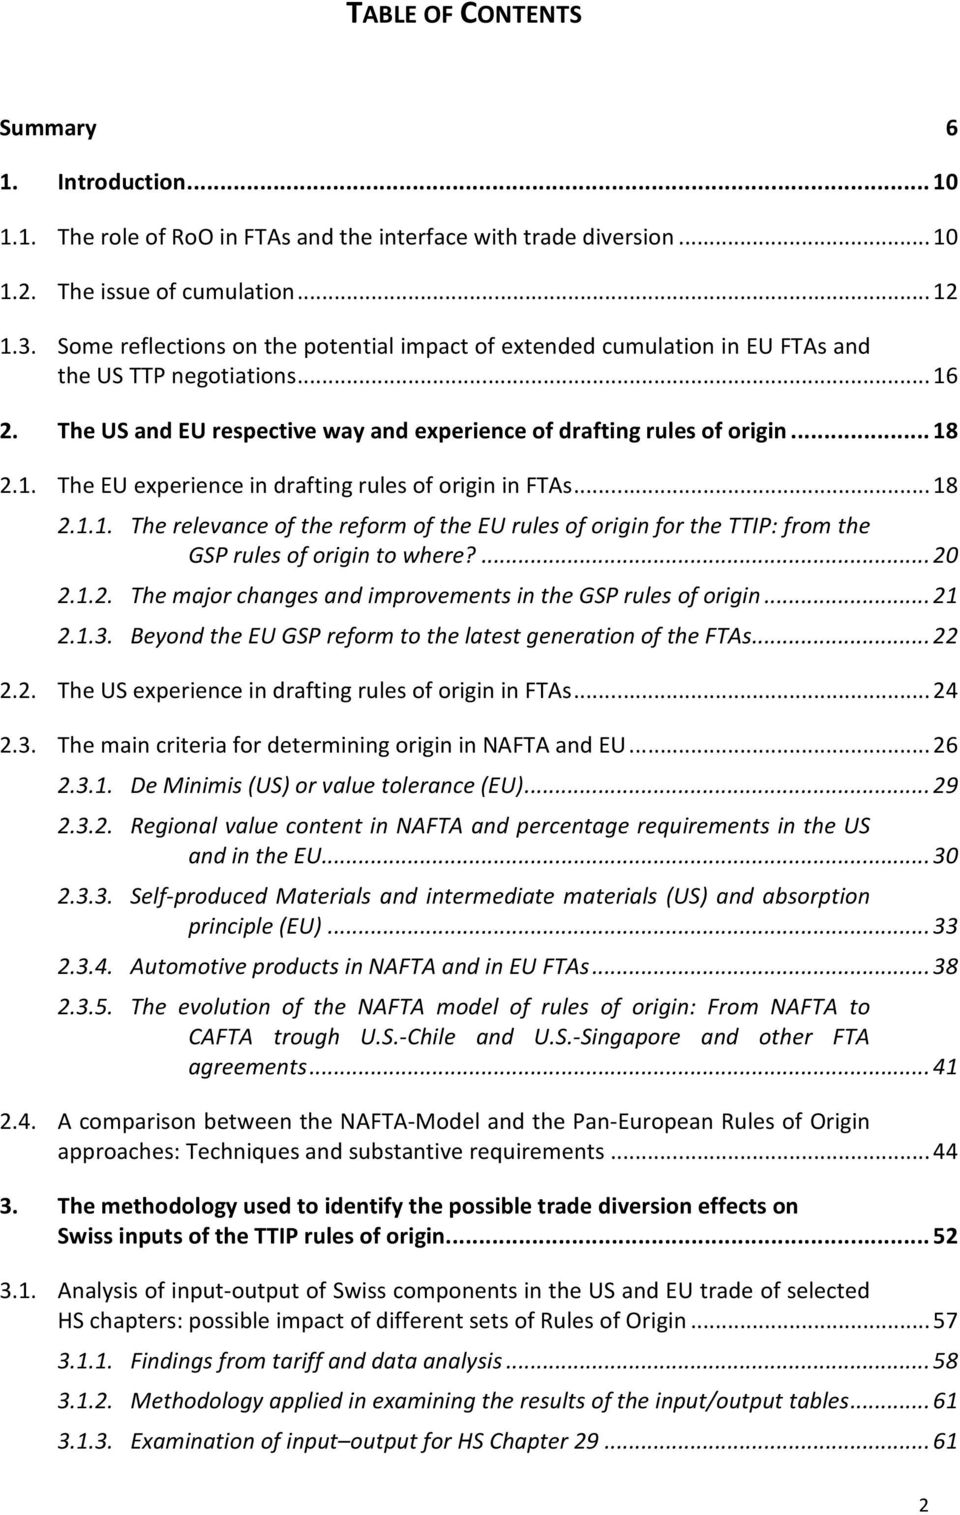 .. 18 2.1.1. The relevance of the reform of the EU rules of origin for the TTIP: from the GSP rules of origin to where?... 20 2.1.2. The major changes and improvements in the GSP rules of origin.